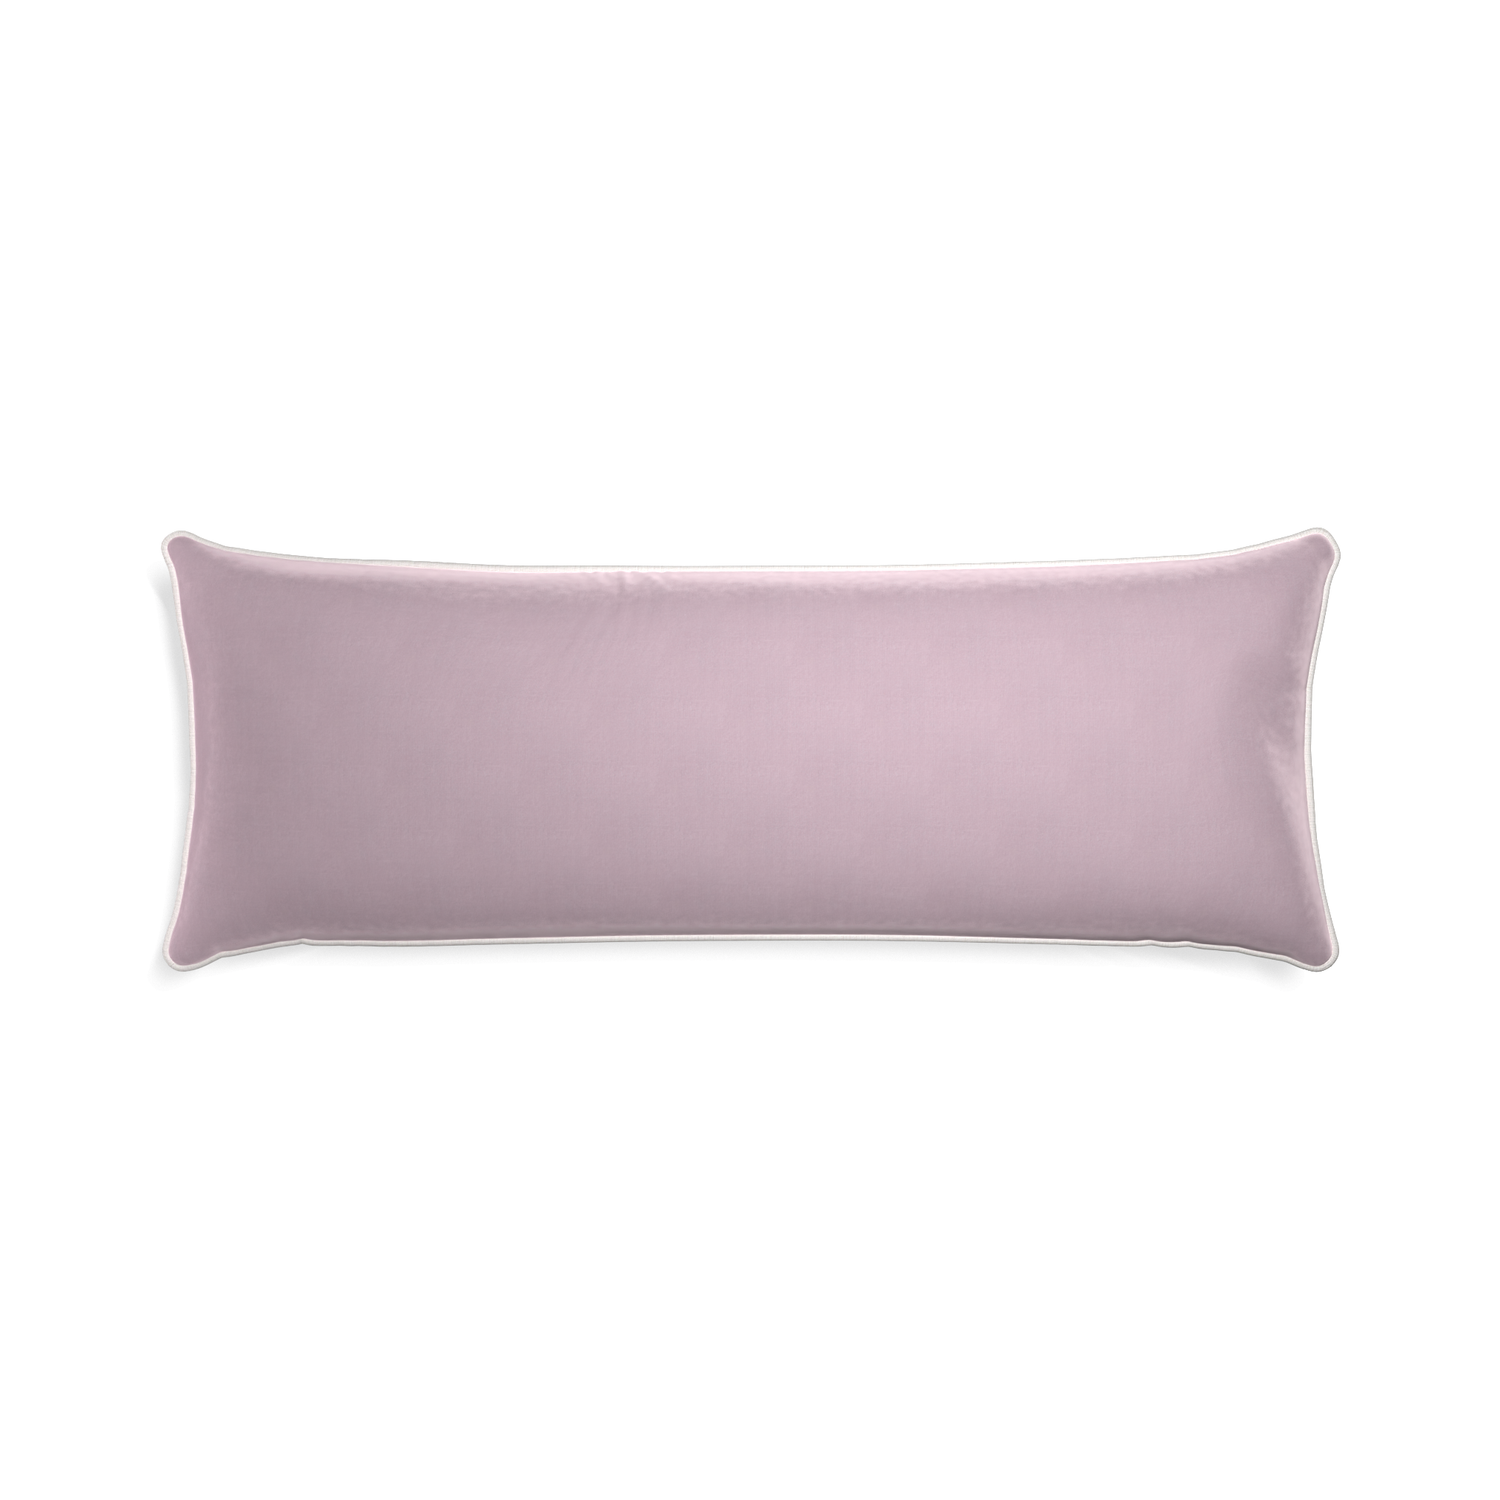 Xl-lumbar lilac velvet custom pillow with snow piping on white background